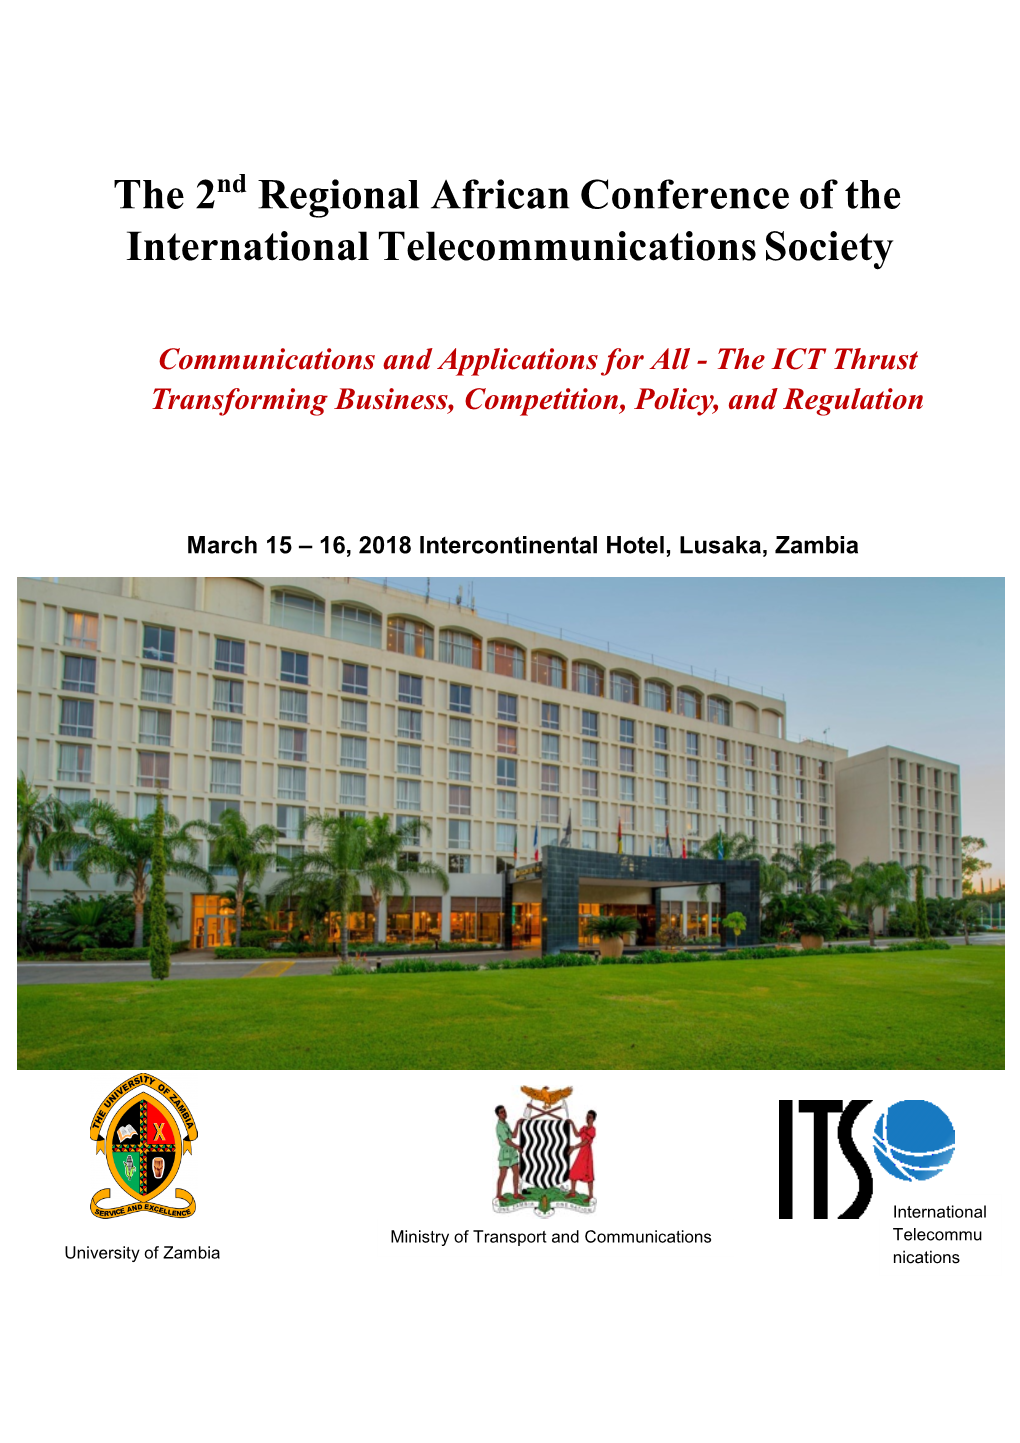 The 2Nd Regional African Conference of the International Telecommunications Society